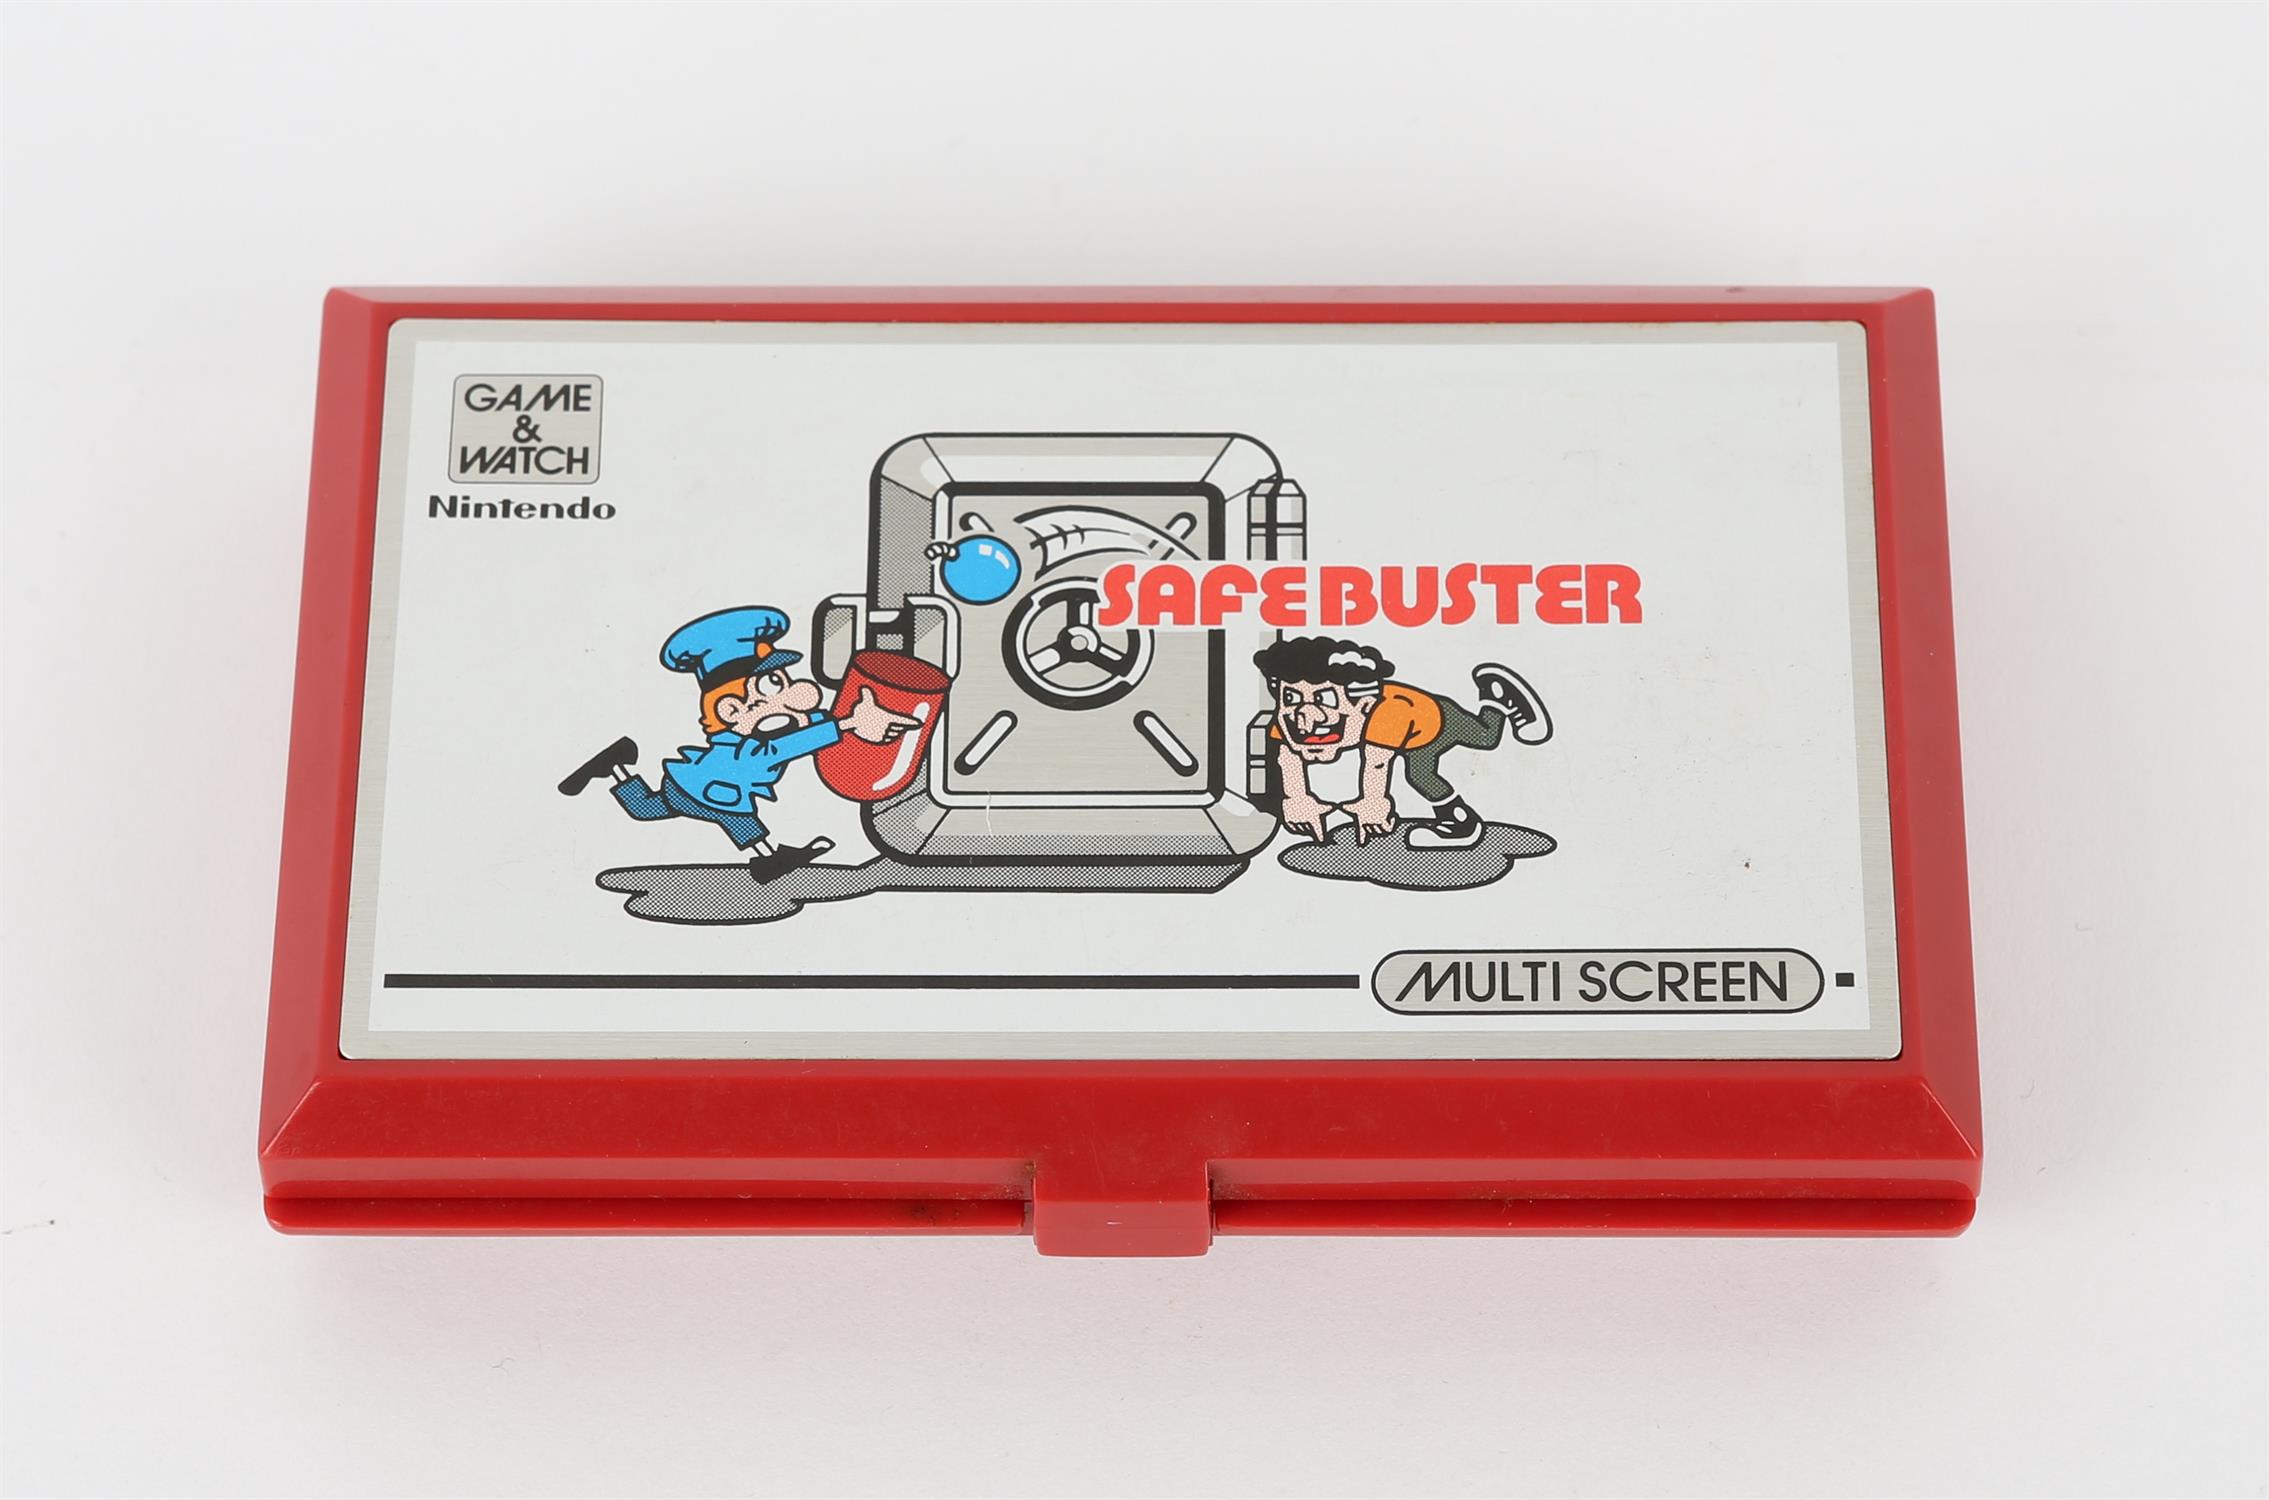 Nintendo Game & Watch Safebuster [JB-63] handheld console Console is unboxed and untested - Image 2 of 2